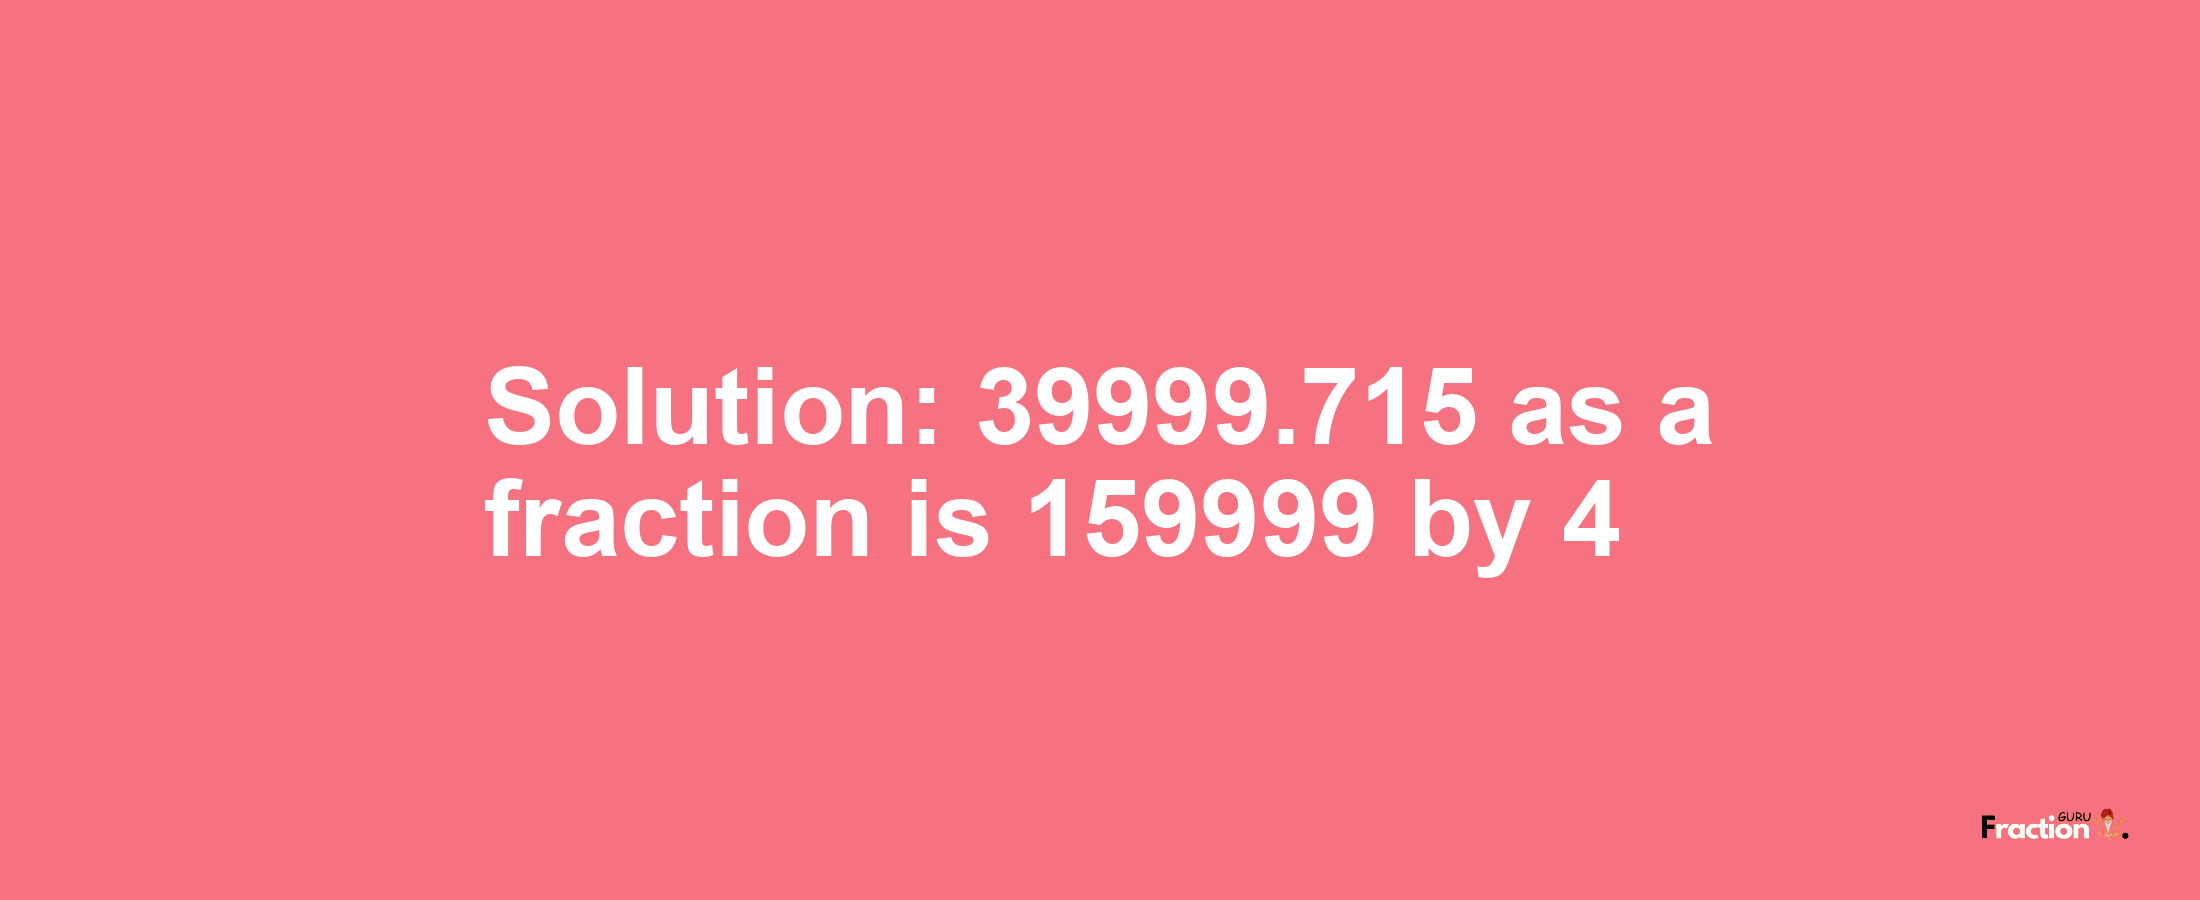 Solution:39999.715 as a fraction is 159999/4